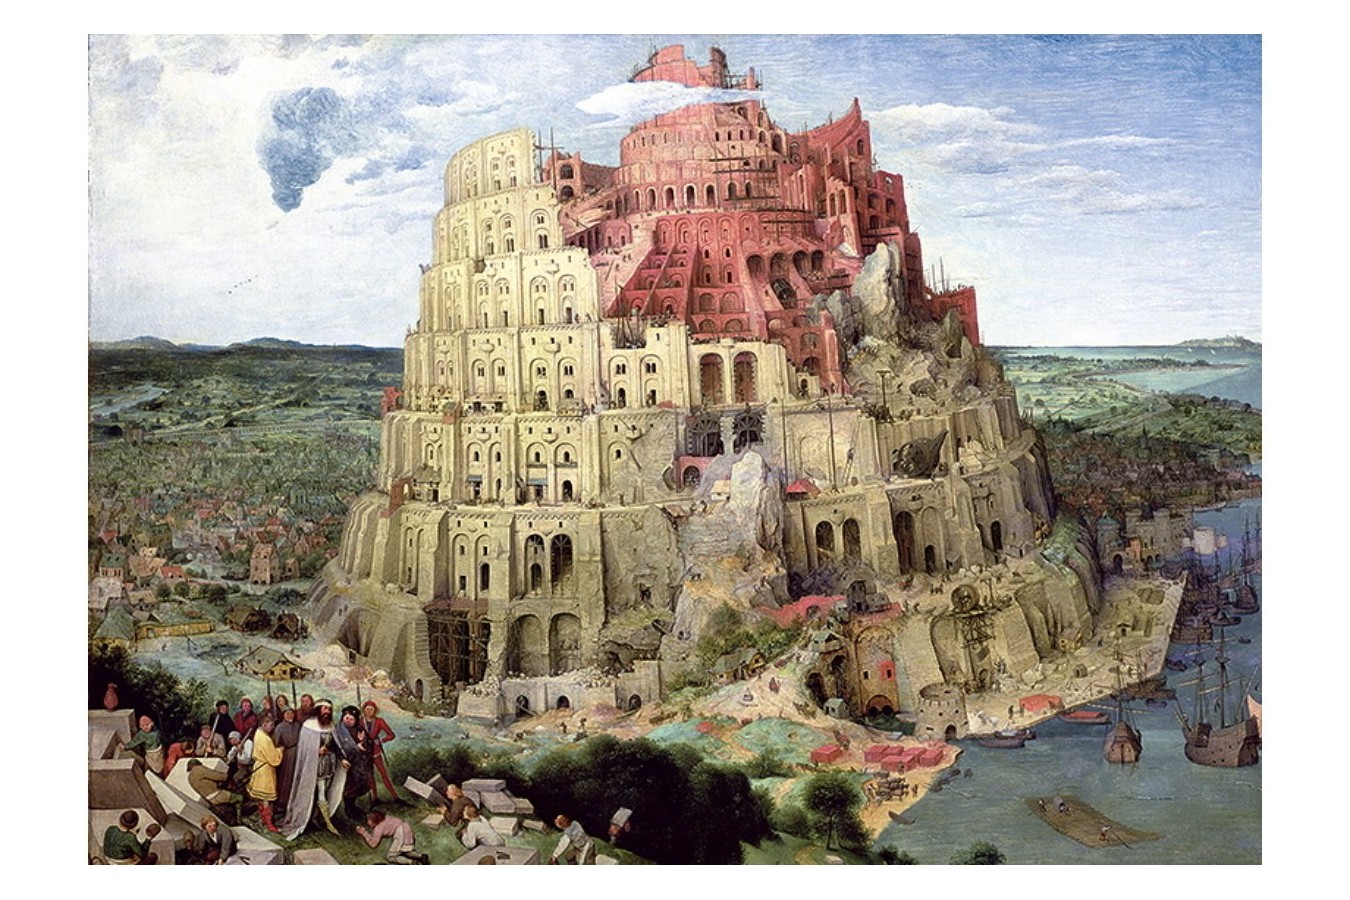 Puzzle Trefl - Tower Of Babel, 4000 piese (45001)